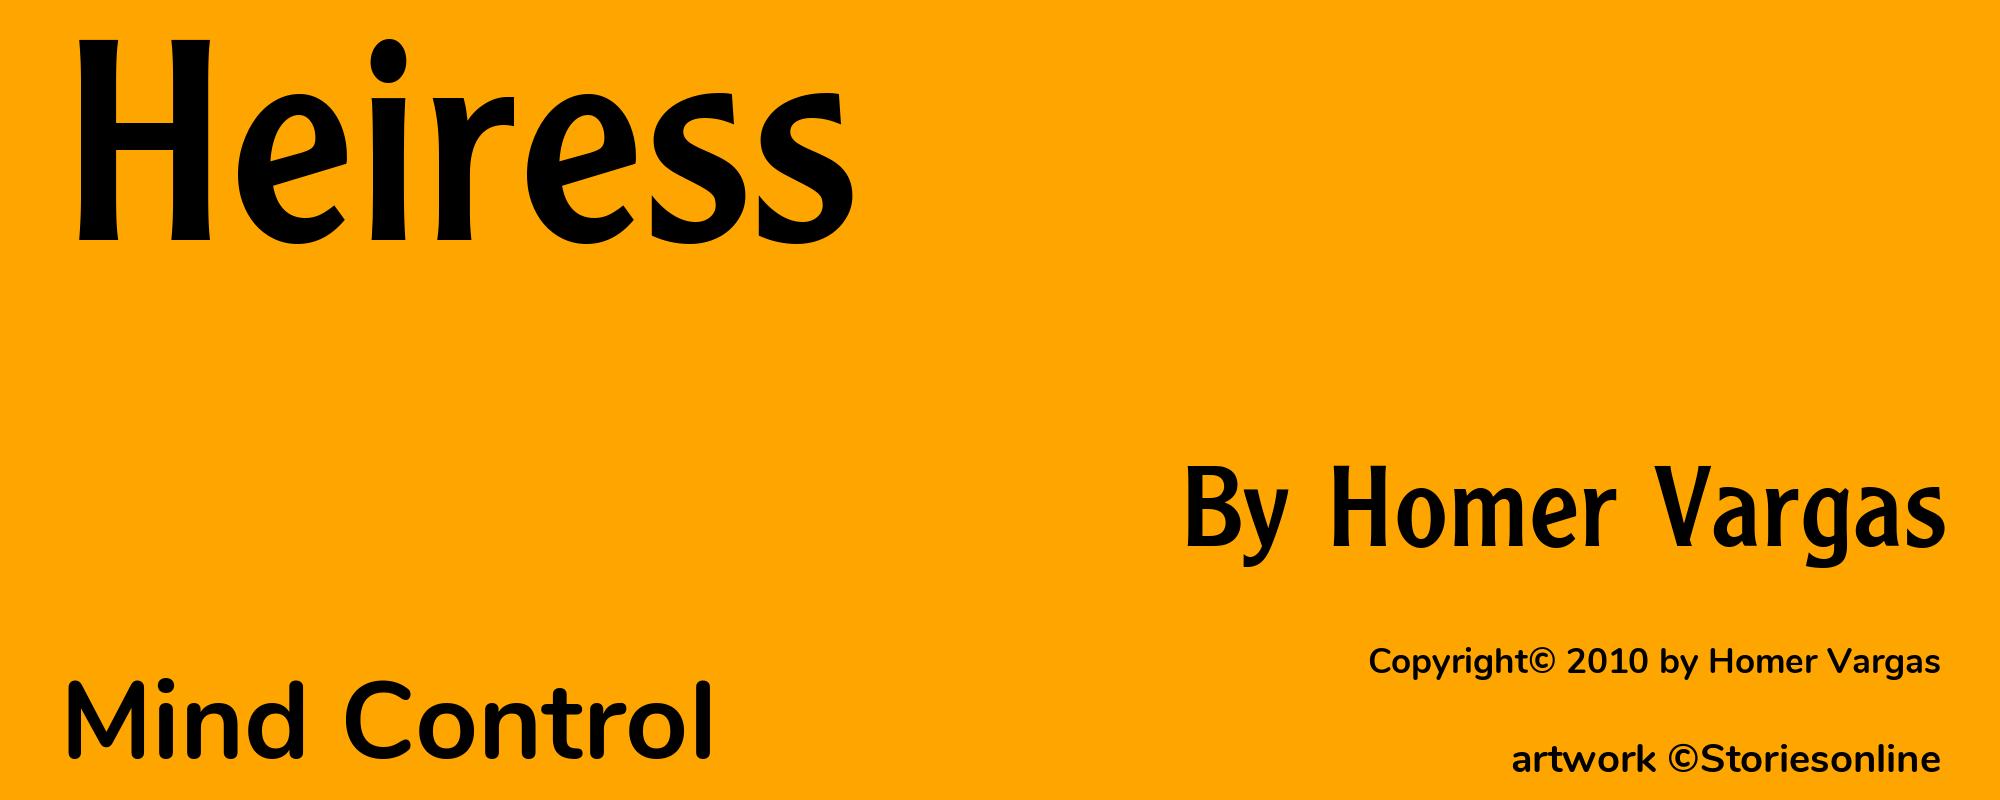 Heiress - Cover